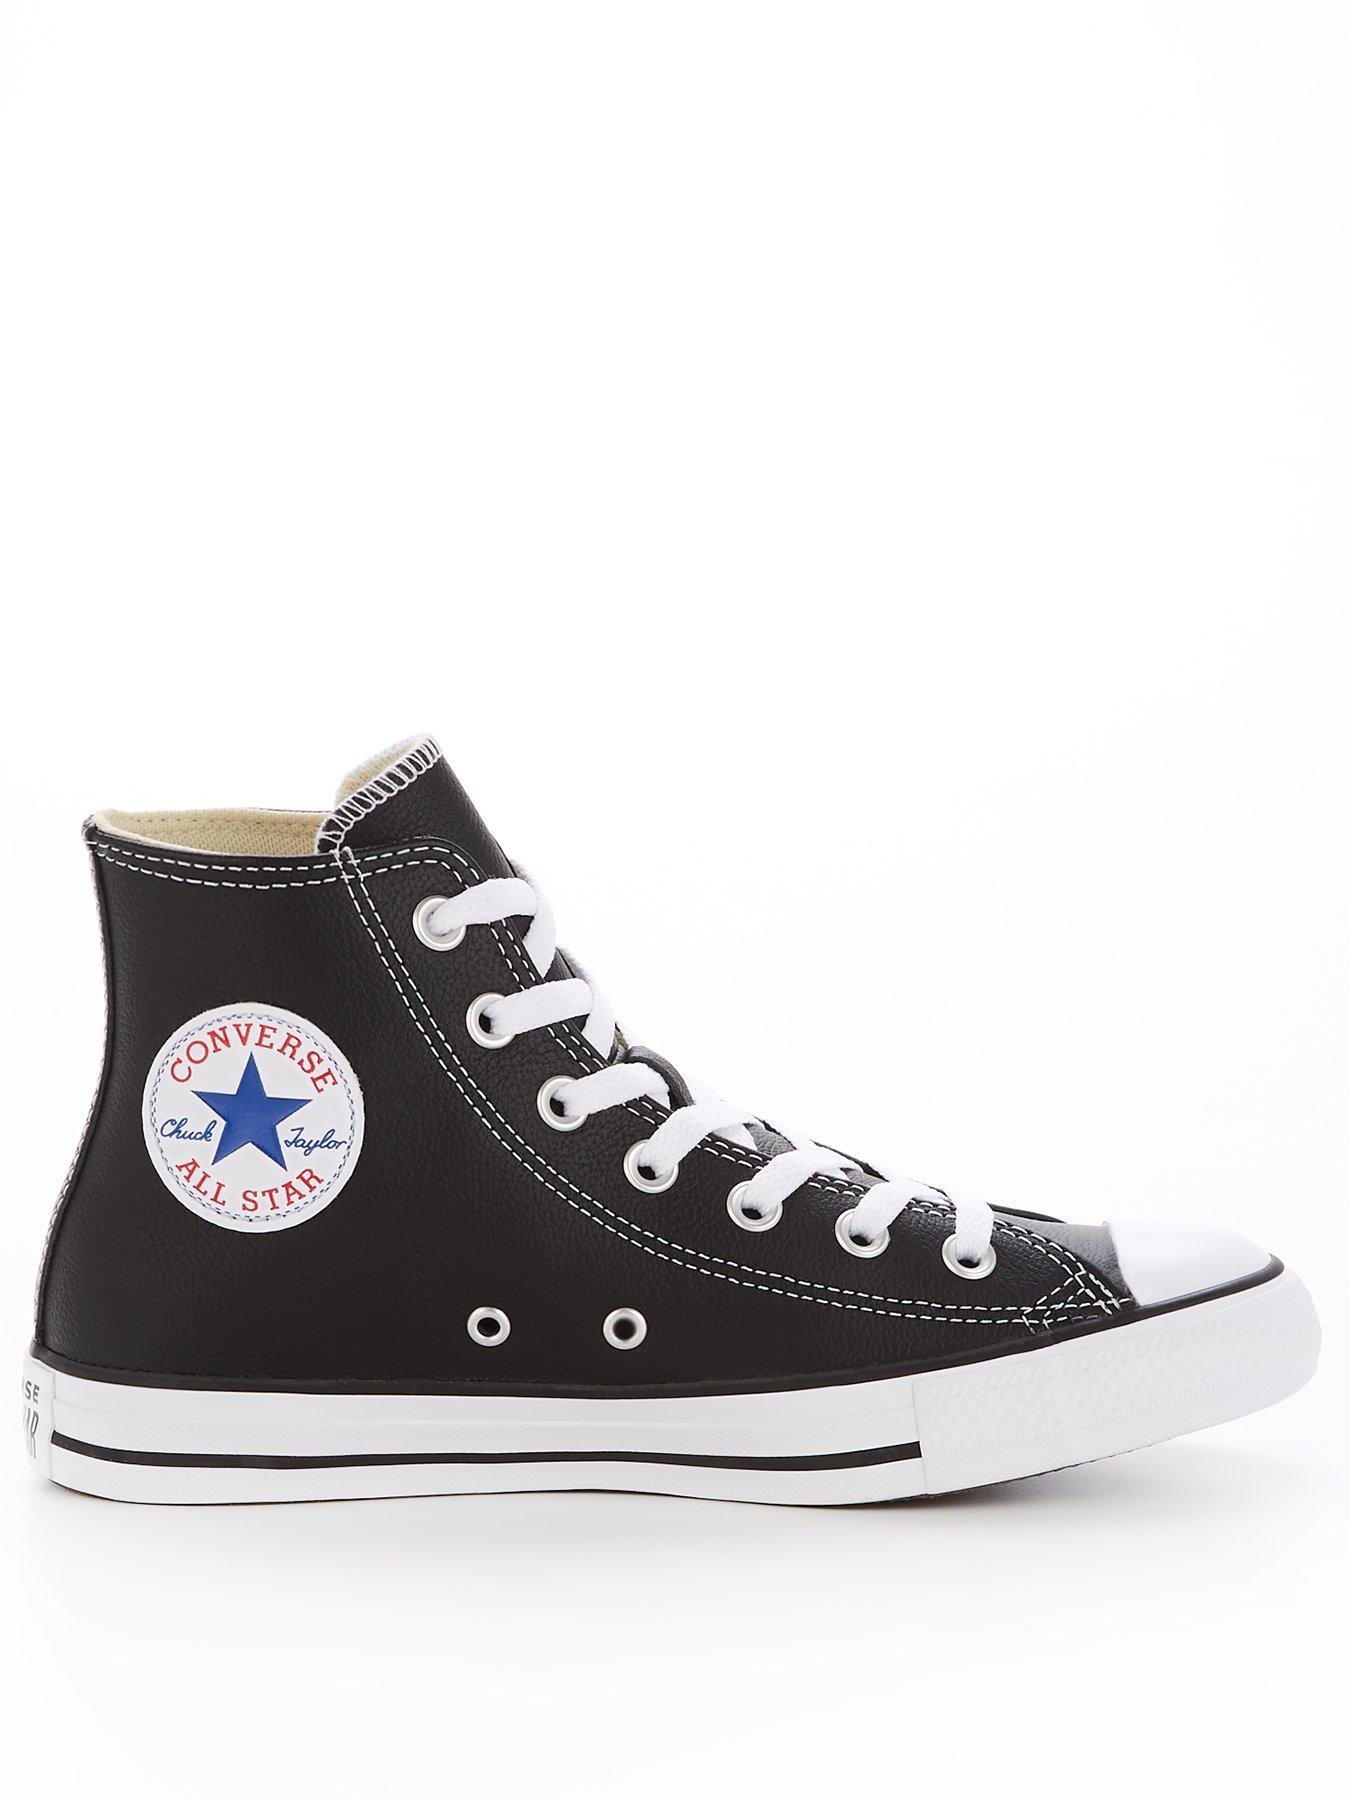 converse all star high tops black and white